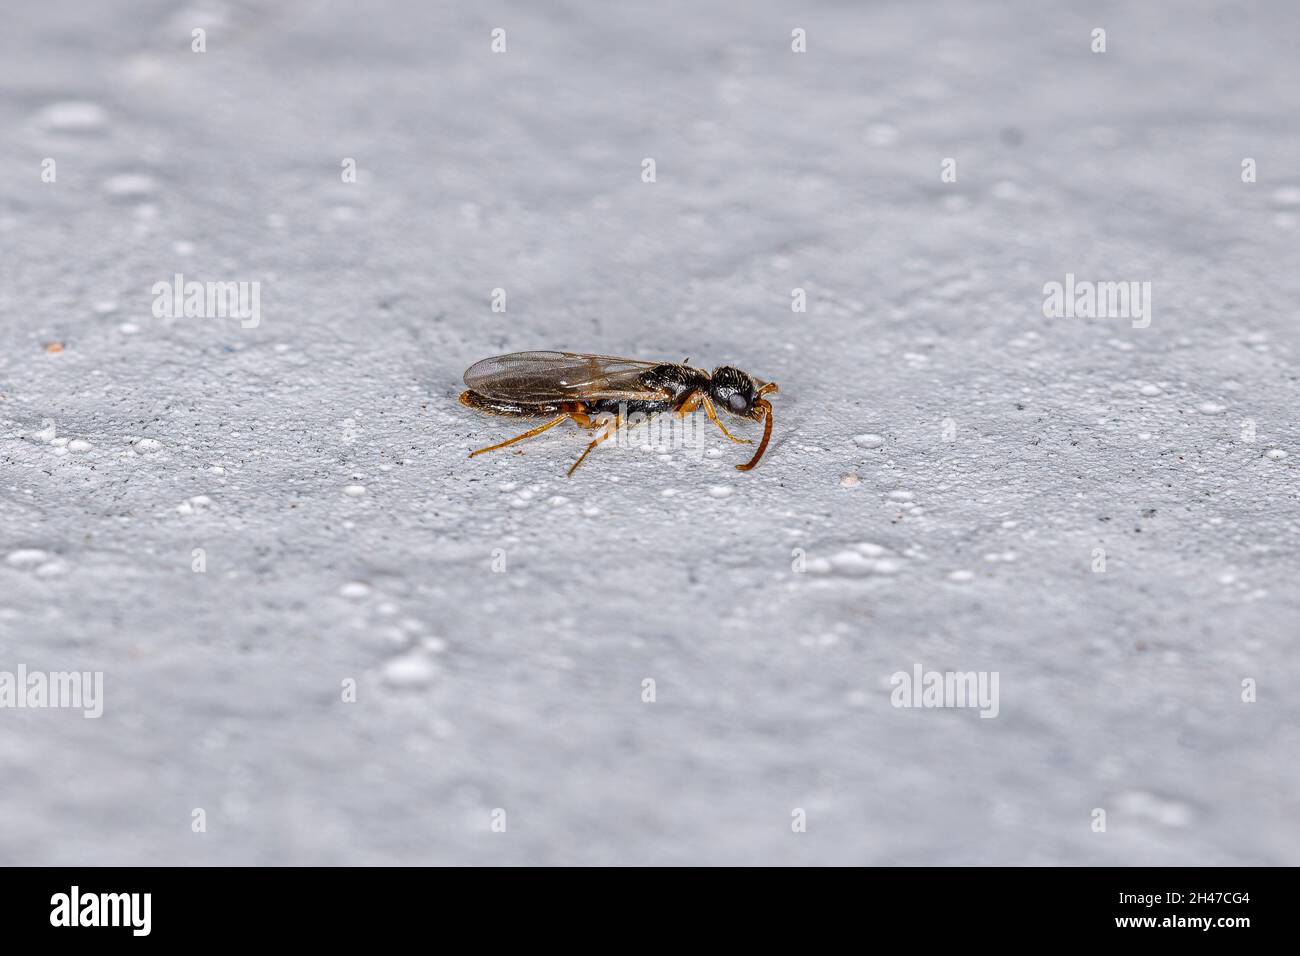 Adult Flat Wasp of the Family Bethylidae Stock Photo